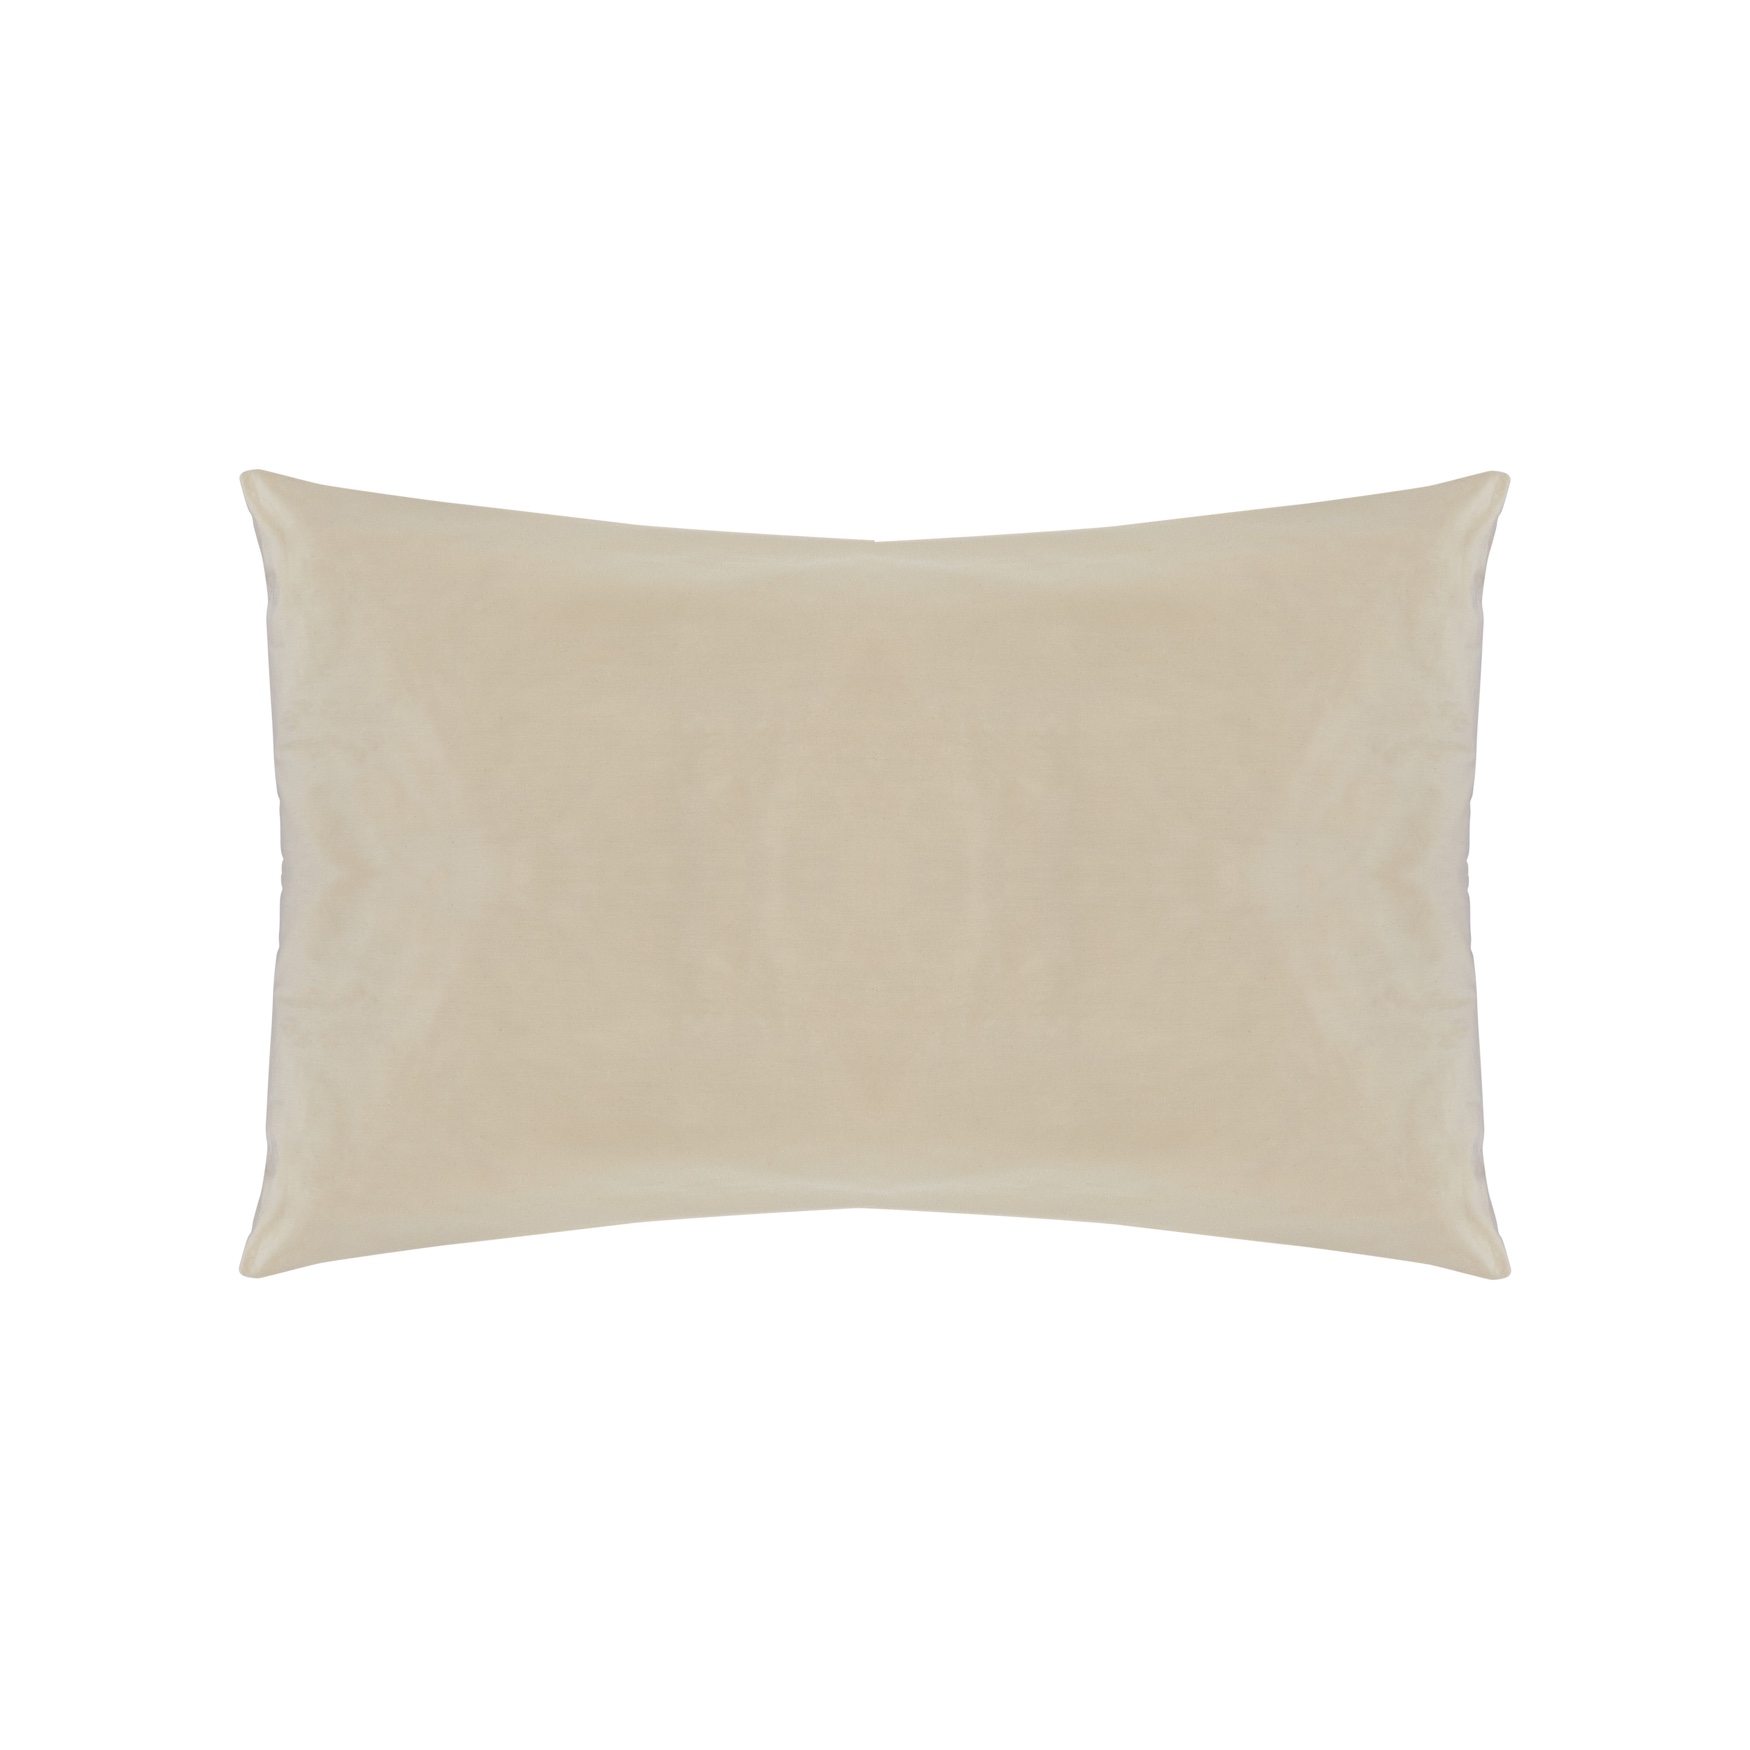 myWool Pillow™ 100% Washable Wool Pillow, 